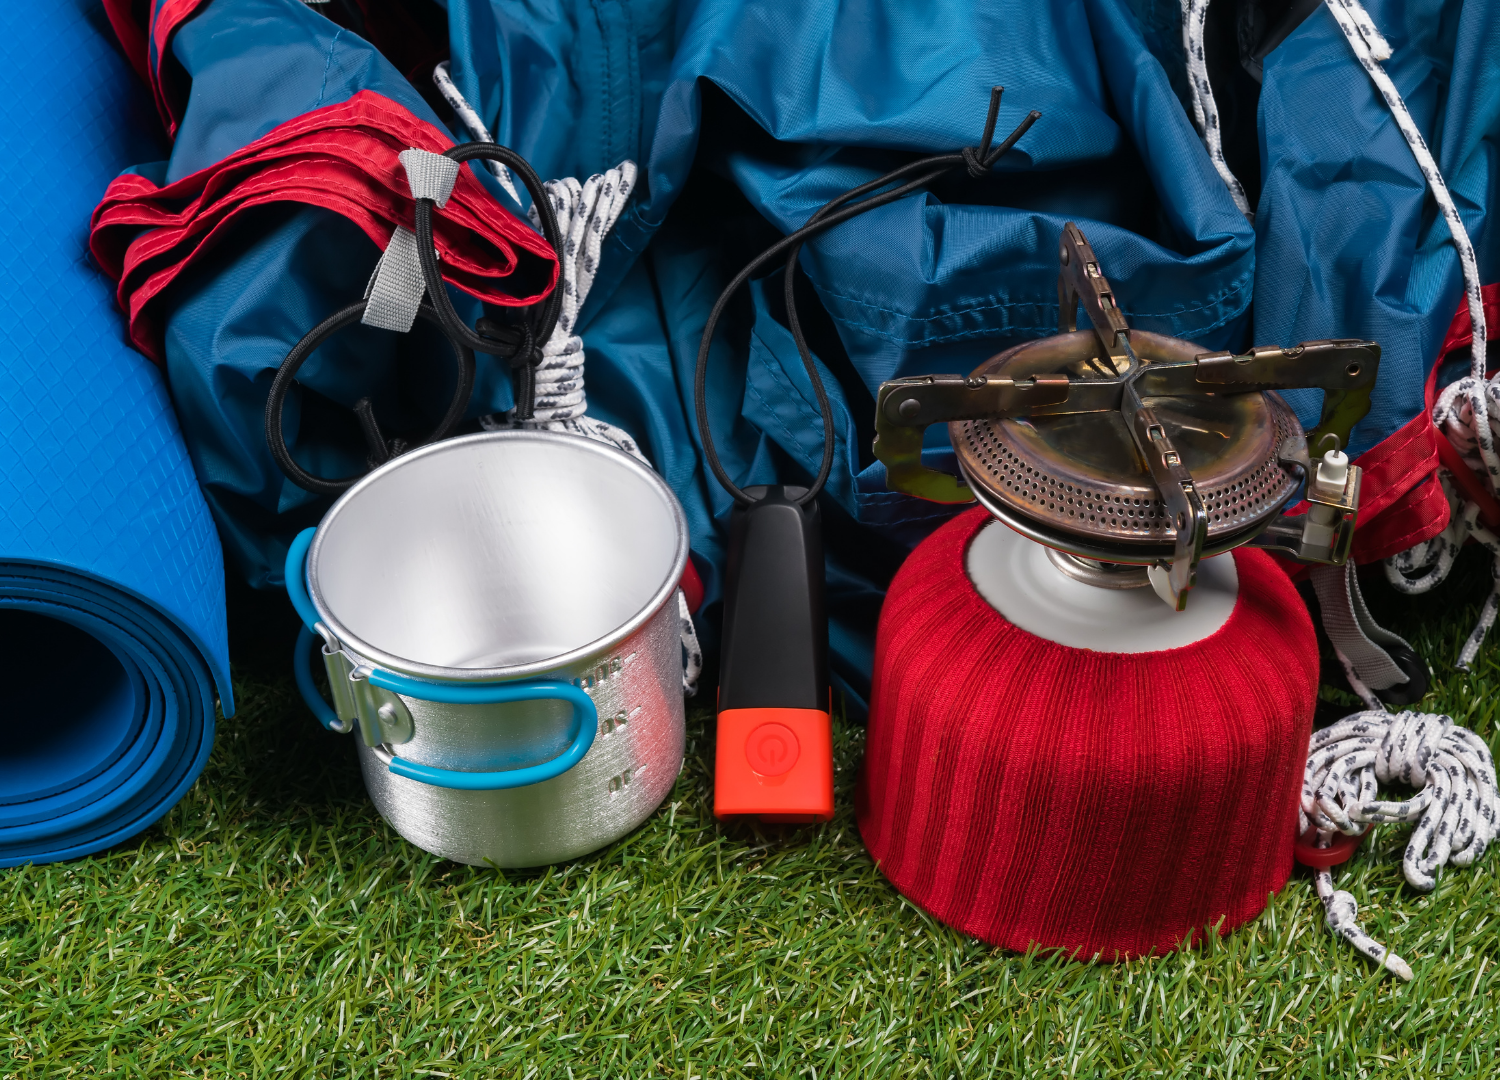 When is it Time to Replace my Camping Gear?